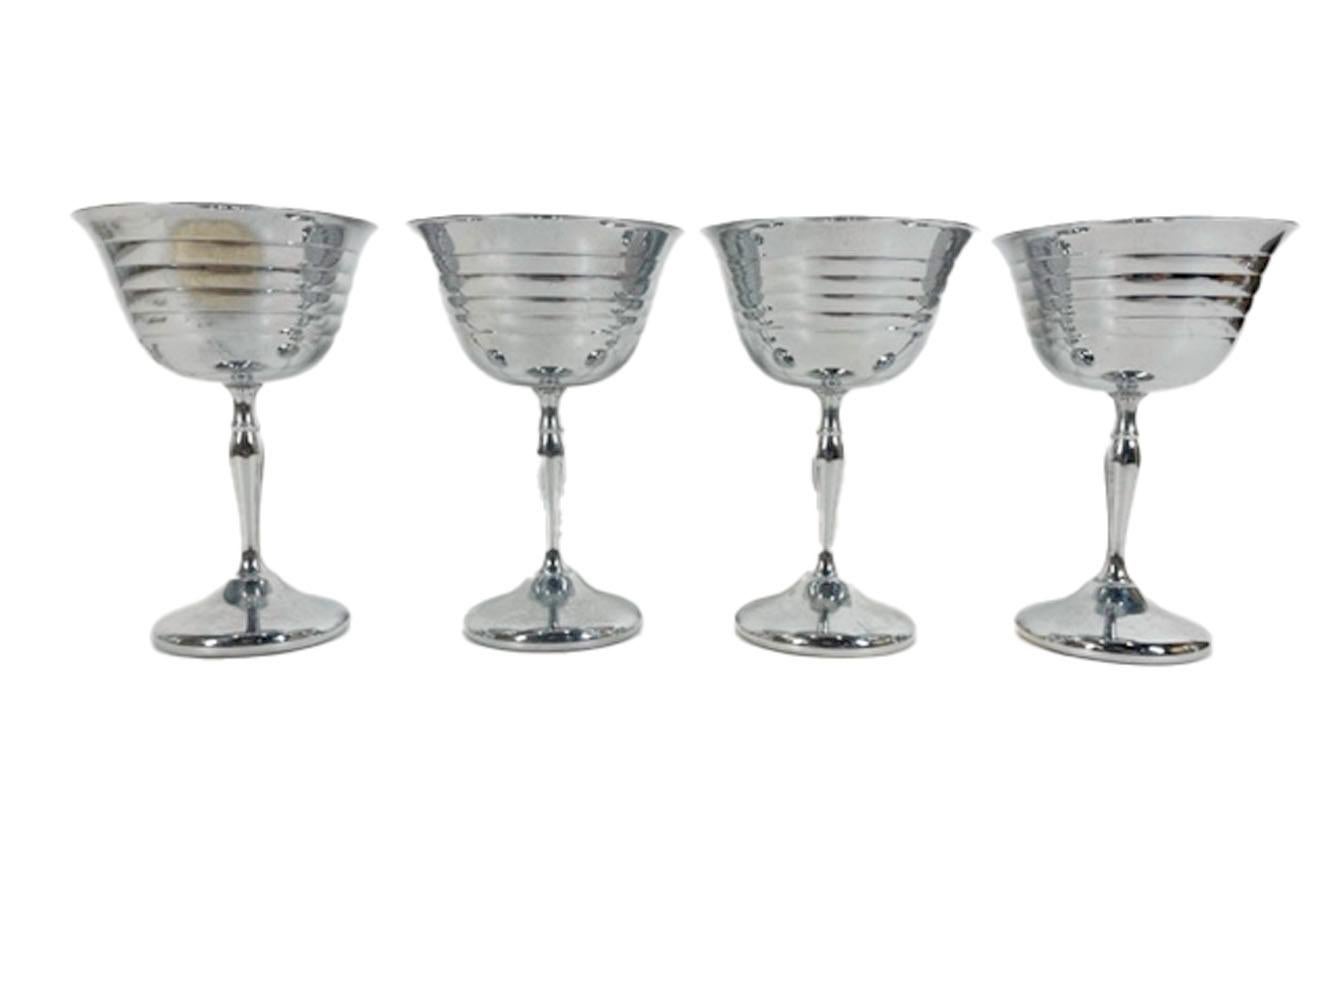 Art Deco Chrome and Bakelite Cocktail Shaker Set with Ribbed Design For Sale 4